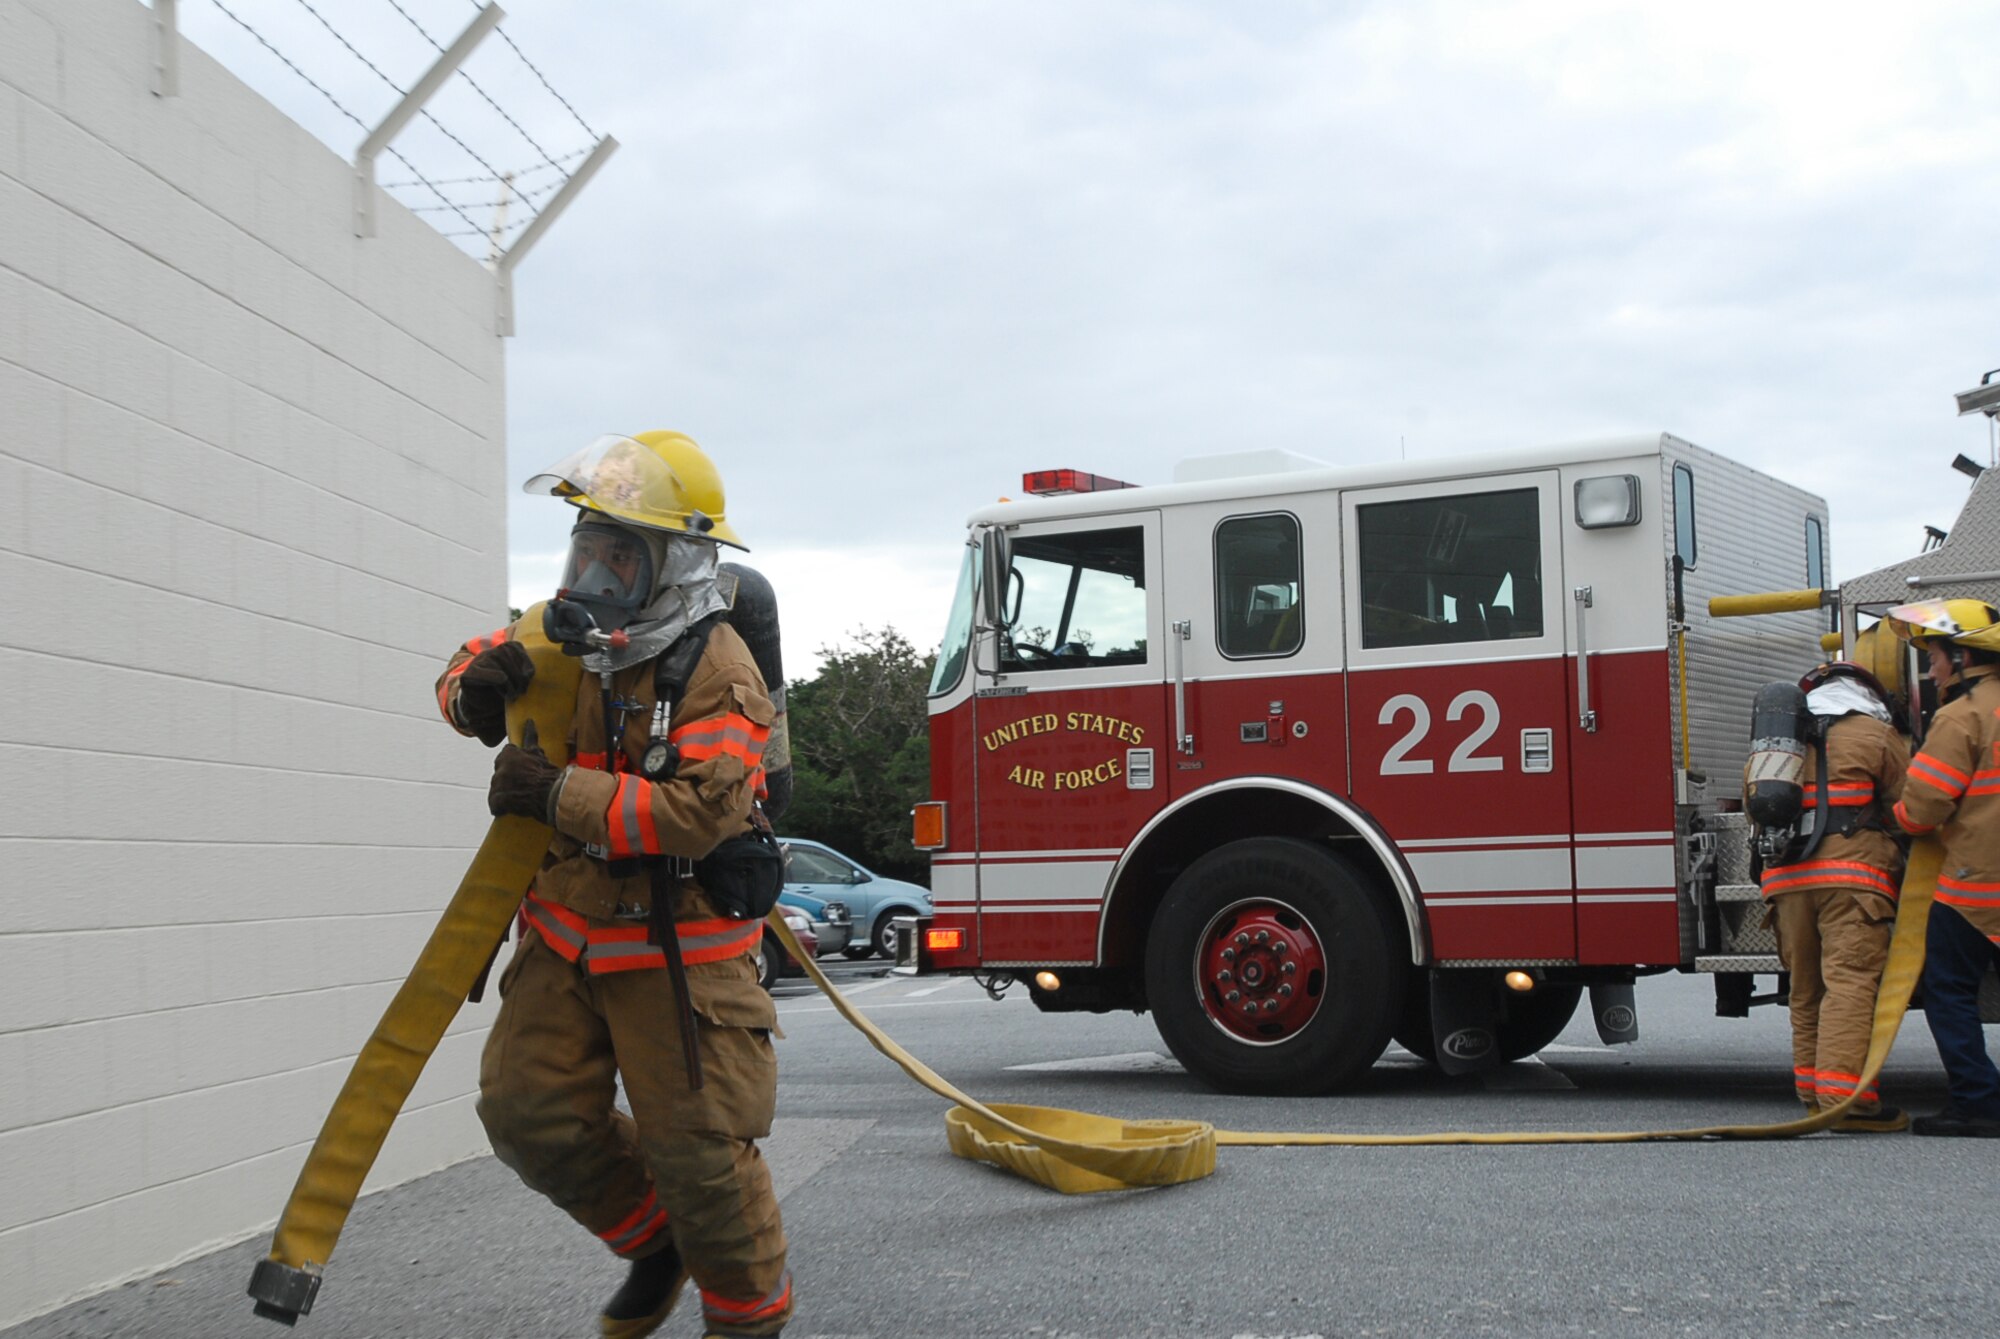 A base firefighter carries a fire hose to put out a simulated fire during a Local Operational Readiness Exercise Beverly High 08-02 scenario at Kadena Air Base, Japan, Dec. 4, 2007. This scenario tested the firefighters ability to respond to a fire while working with other agencies. (U.S. Air Force /Senior Airman Darnell T. Cannady)  